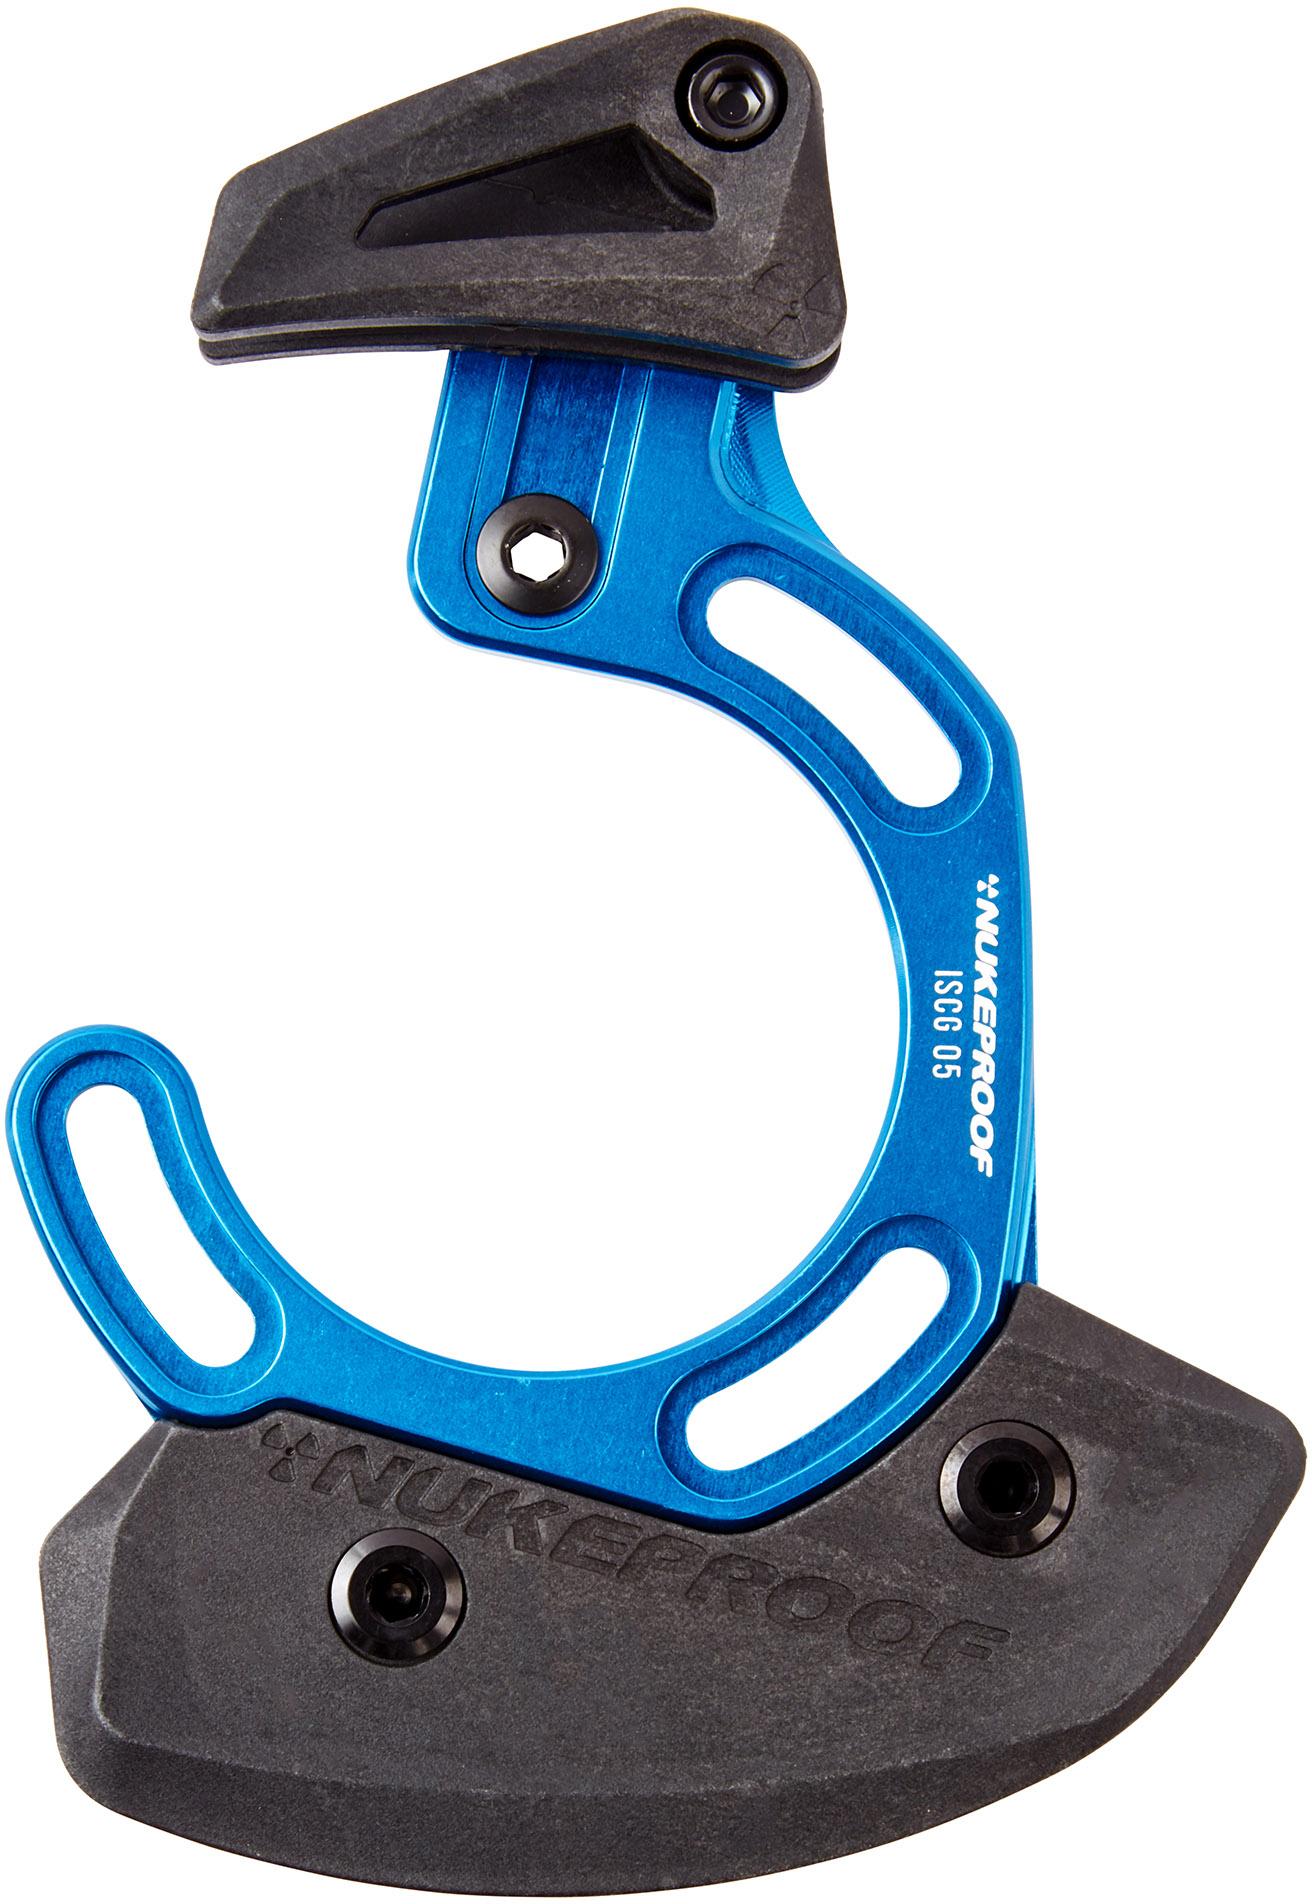 Nukeproof Chain Guide Iscg 05 Top Guide With Bash - Blue/black